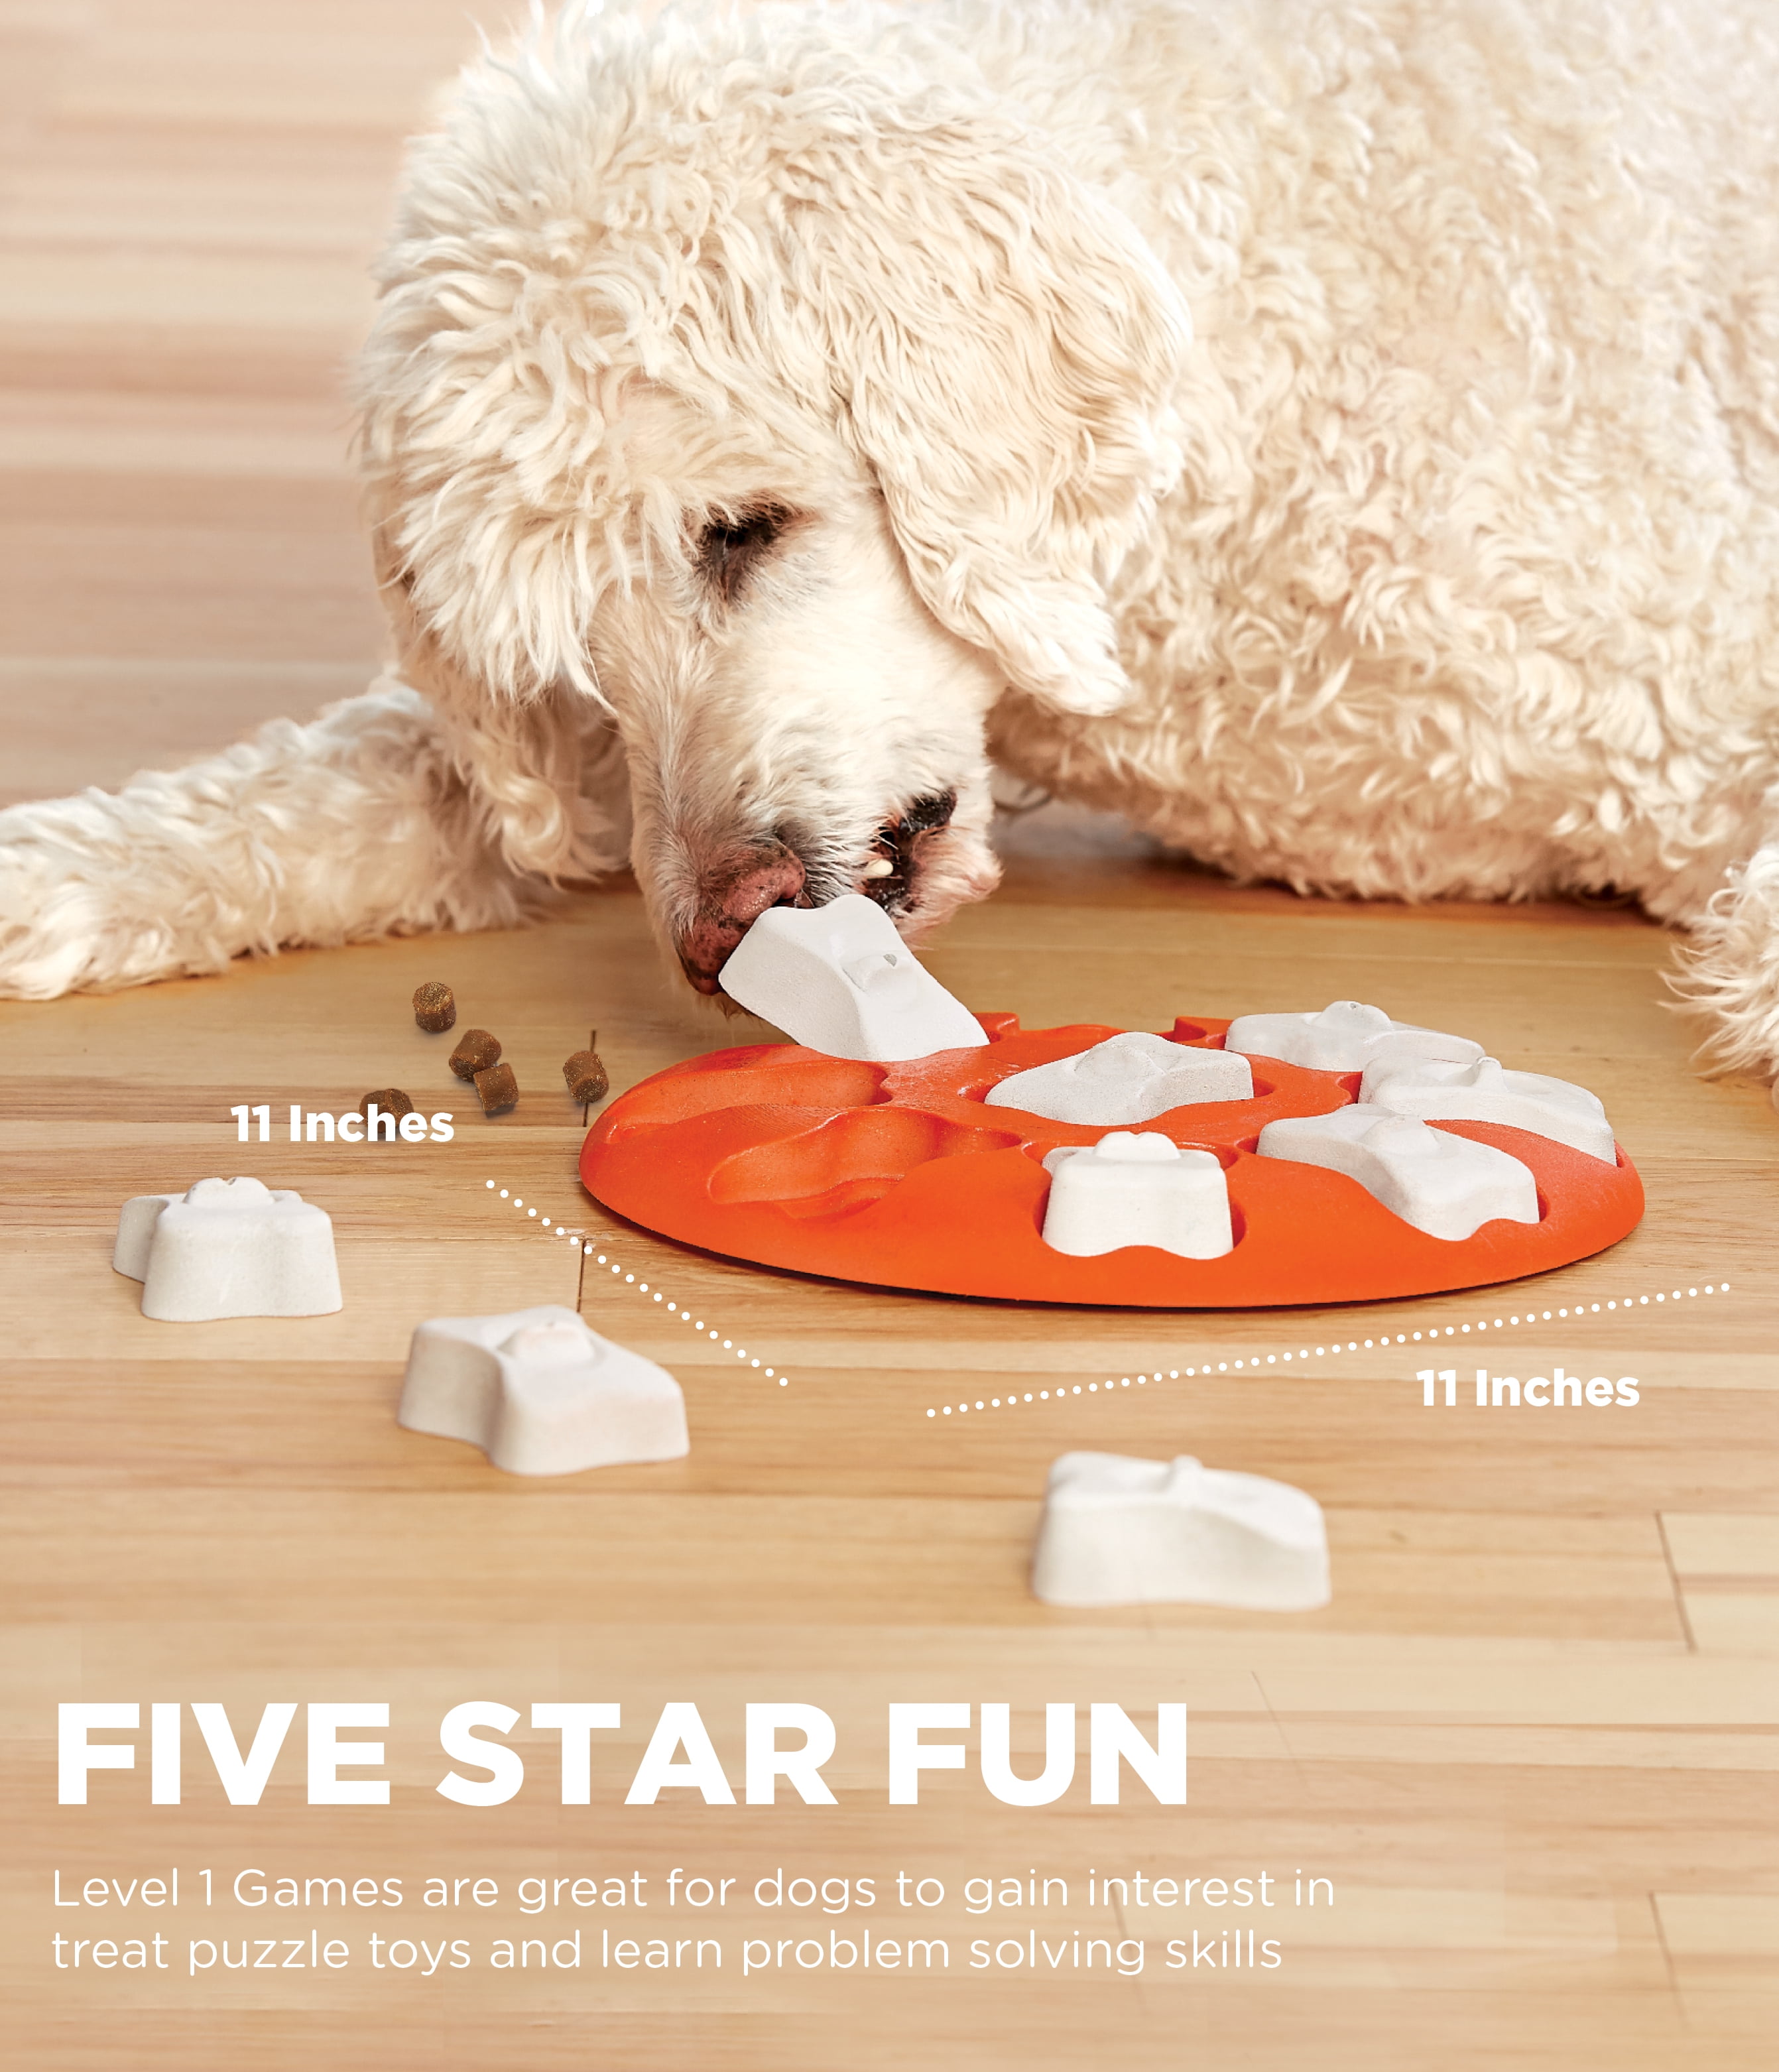 Outward Hound Interactive Dog Toys Challenge Dogs to Find Treats